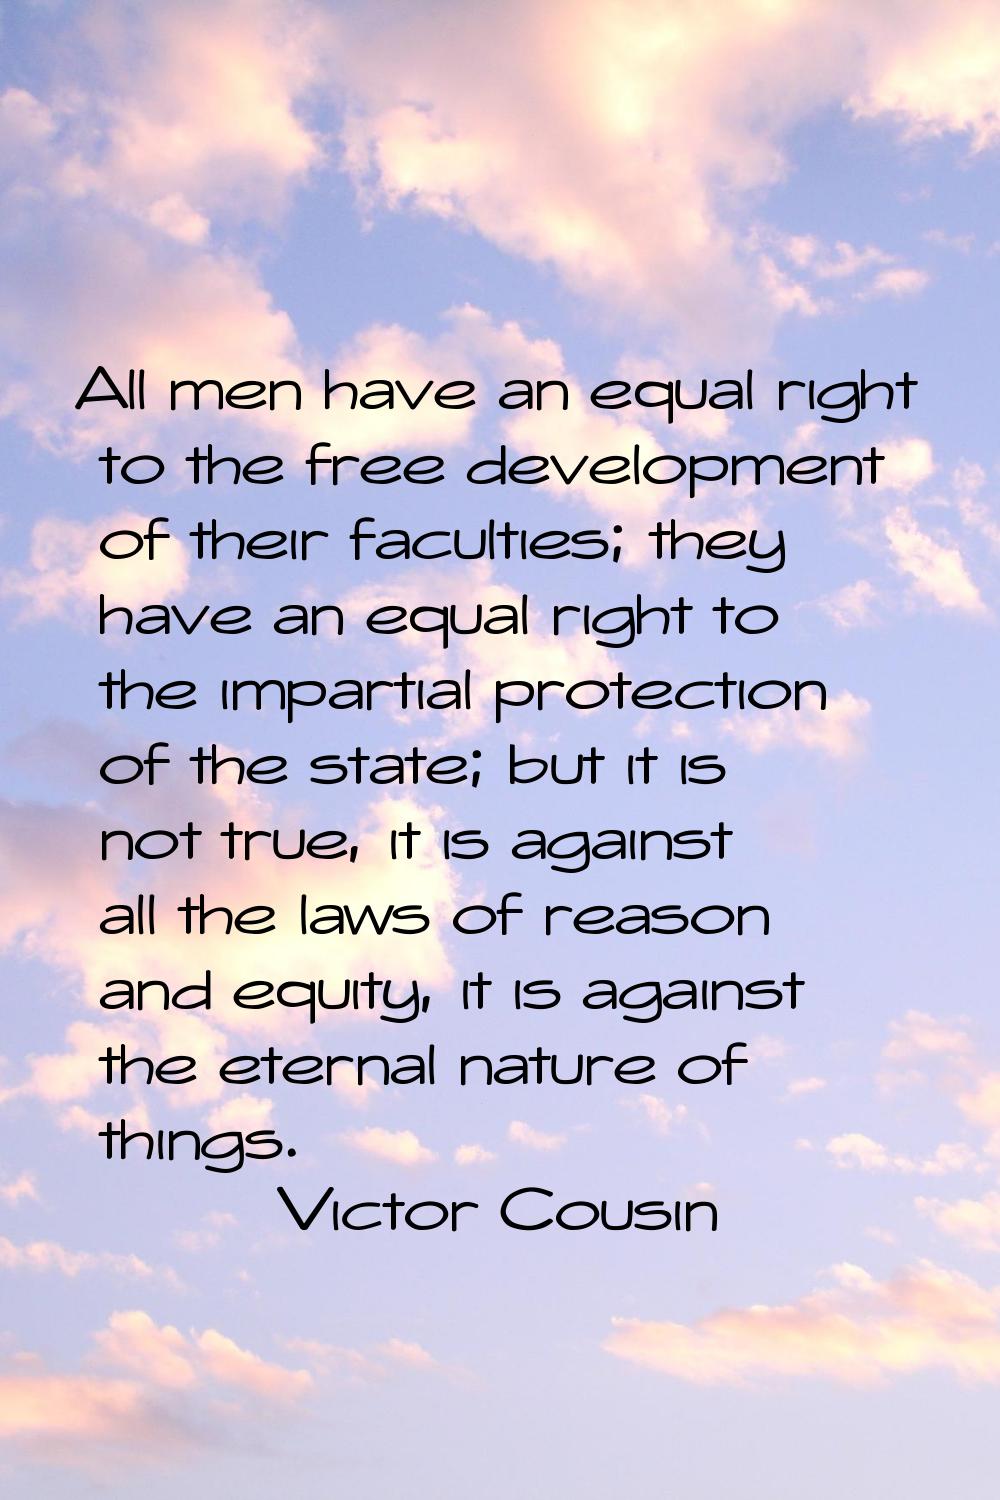 All men have an equal right to the free development of their faculties; they have an equal right to